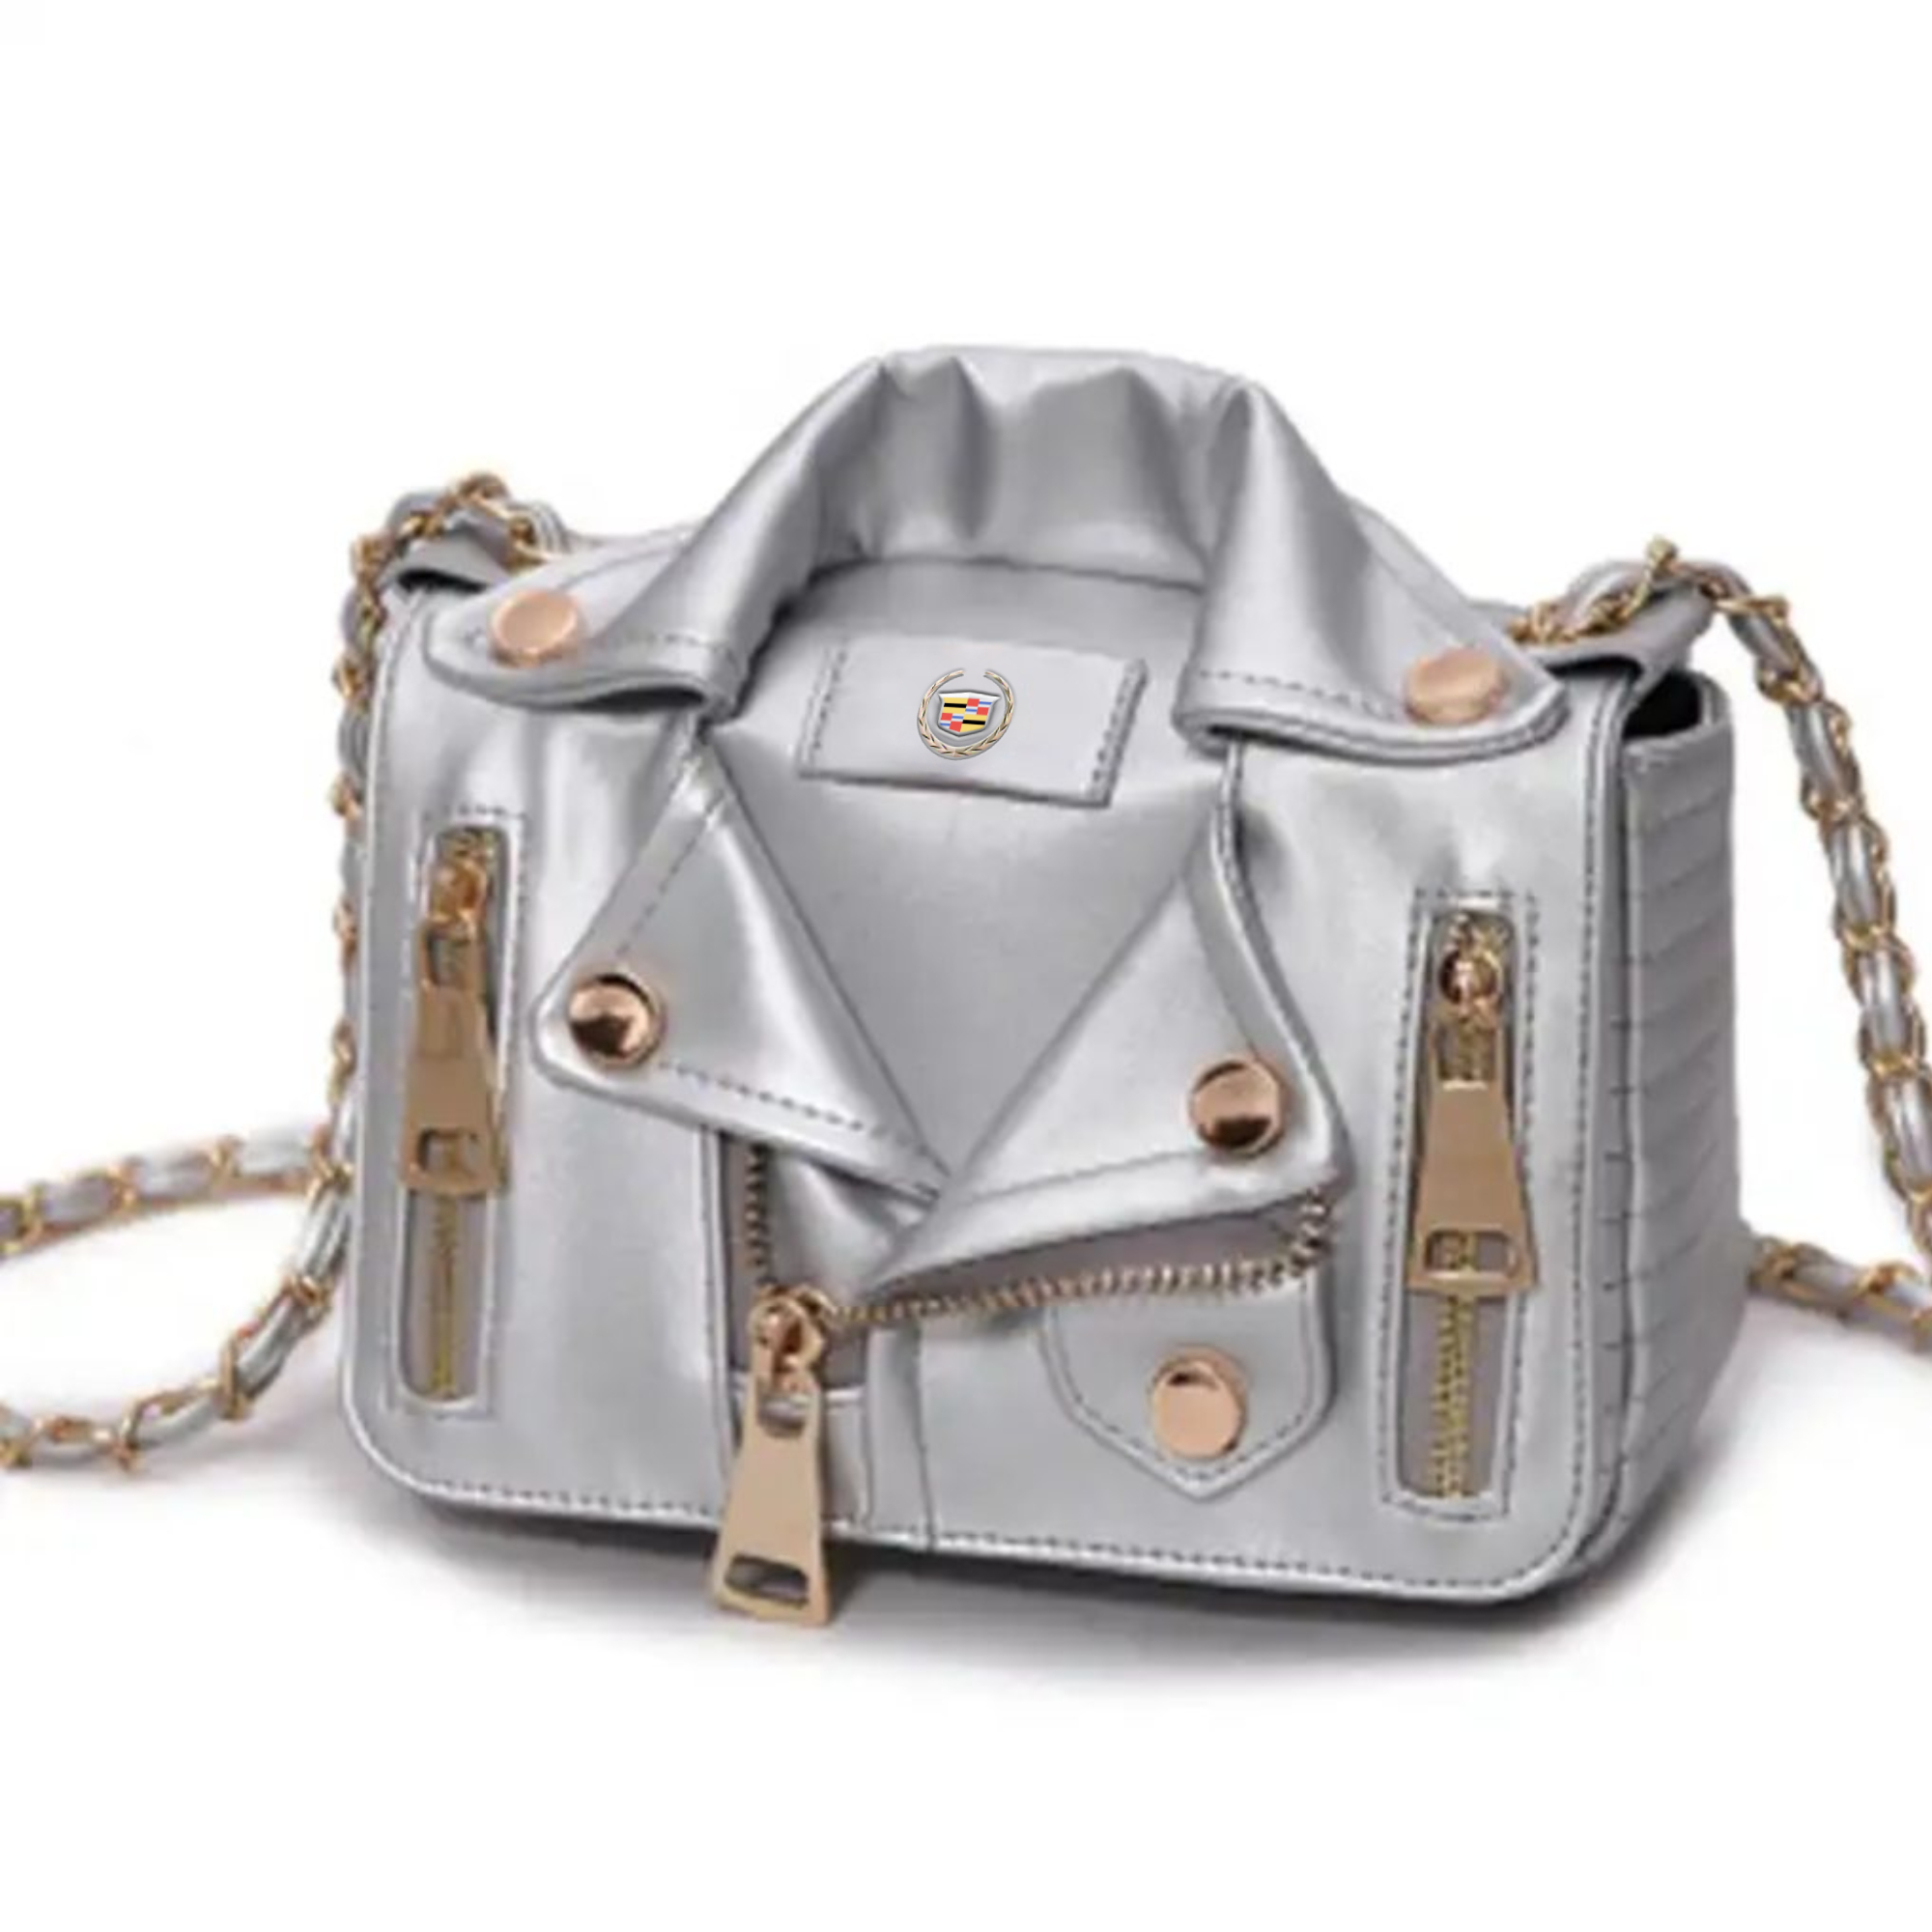 Macy's handbags sale: Shop designer purses and wallets at up to 60% off